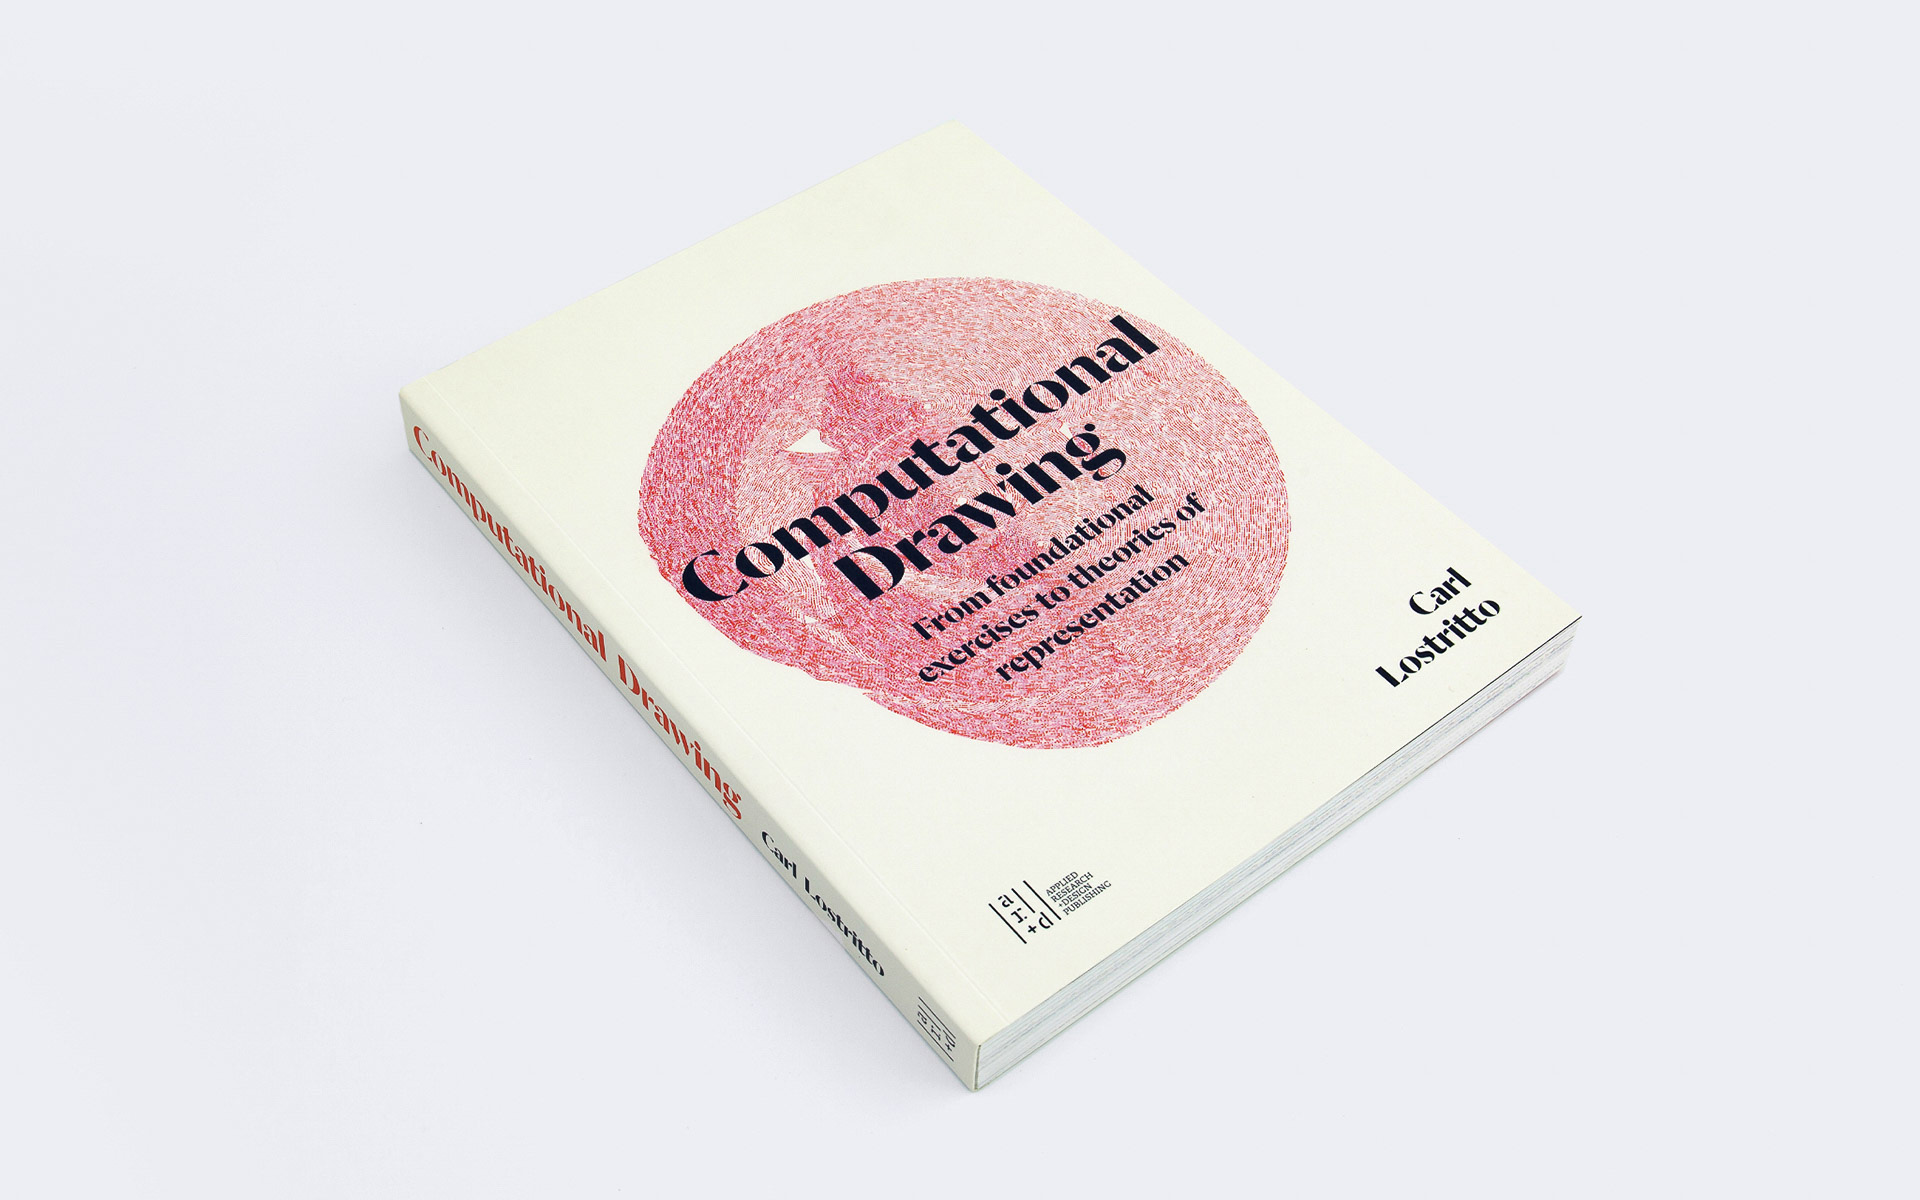 Computational Drawing. Book cover, design by Pablo Mandel.